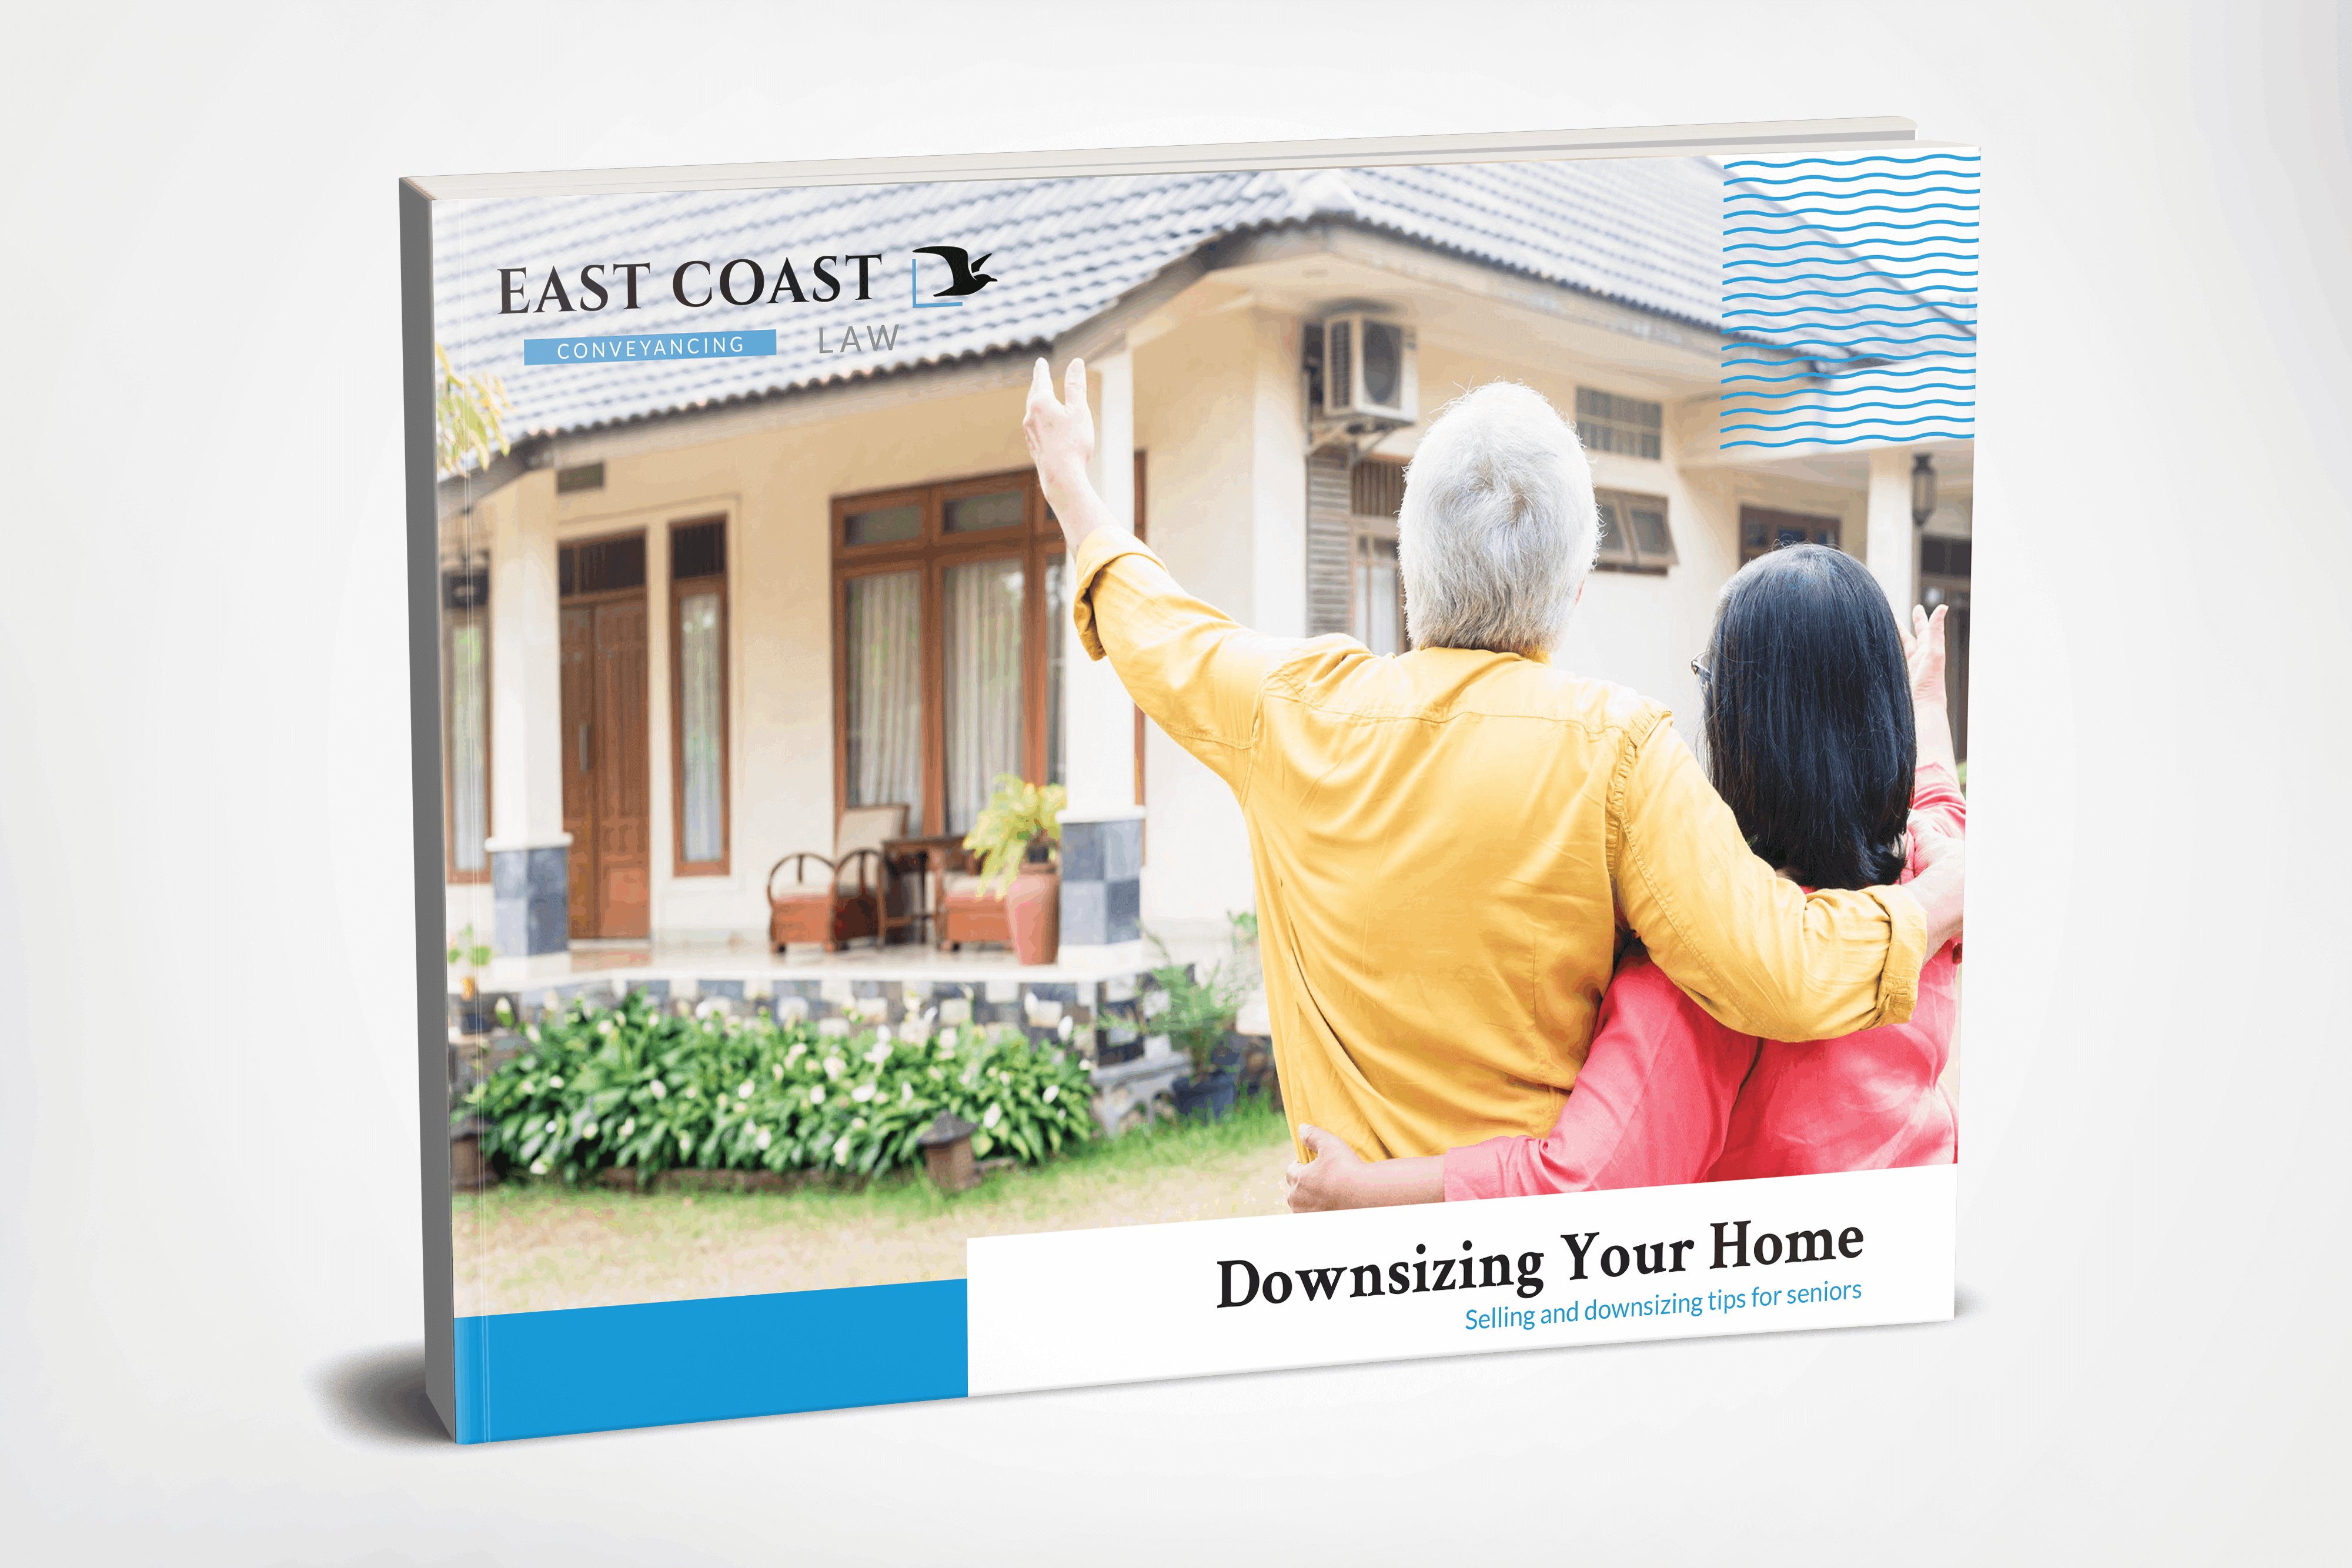 Downsizing your home; selling and downsizing tips for Seniors